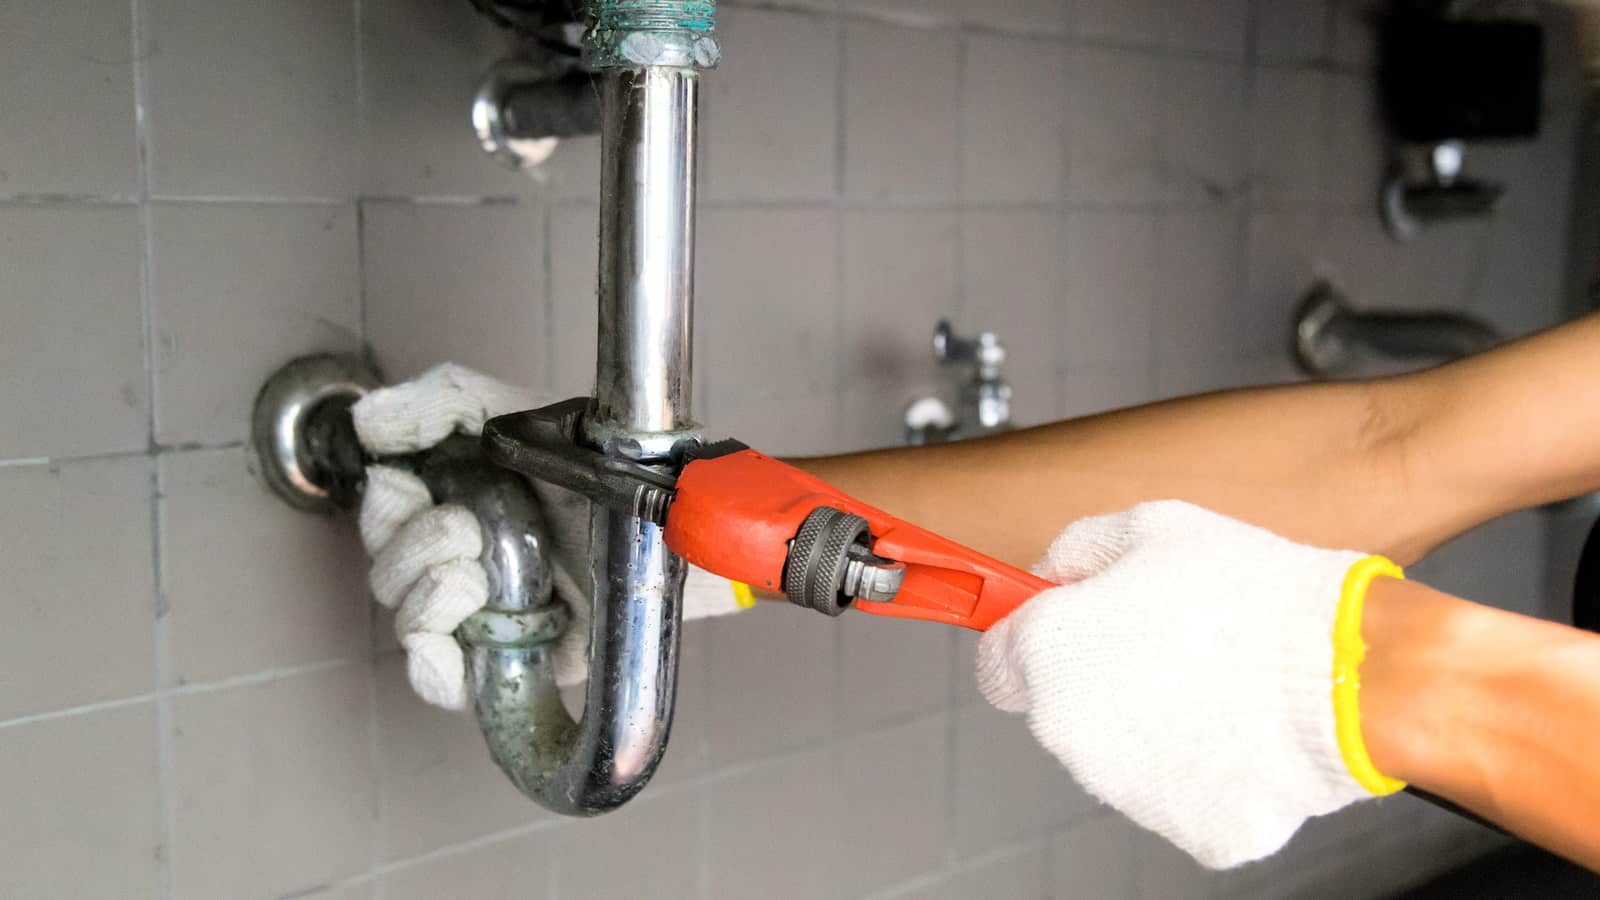 CoCo County Drain Cleaning And Plumbing of Walnut Creek